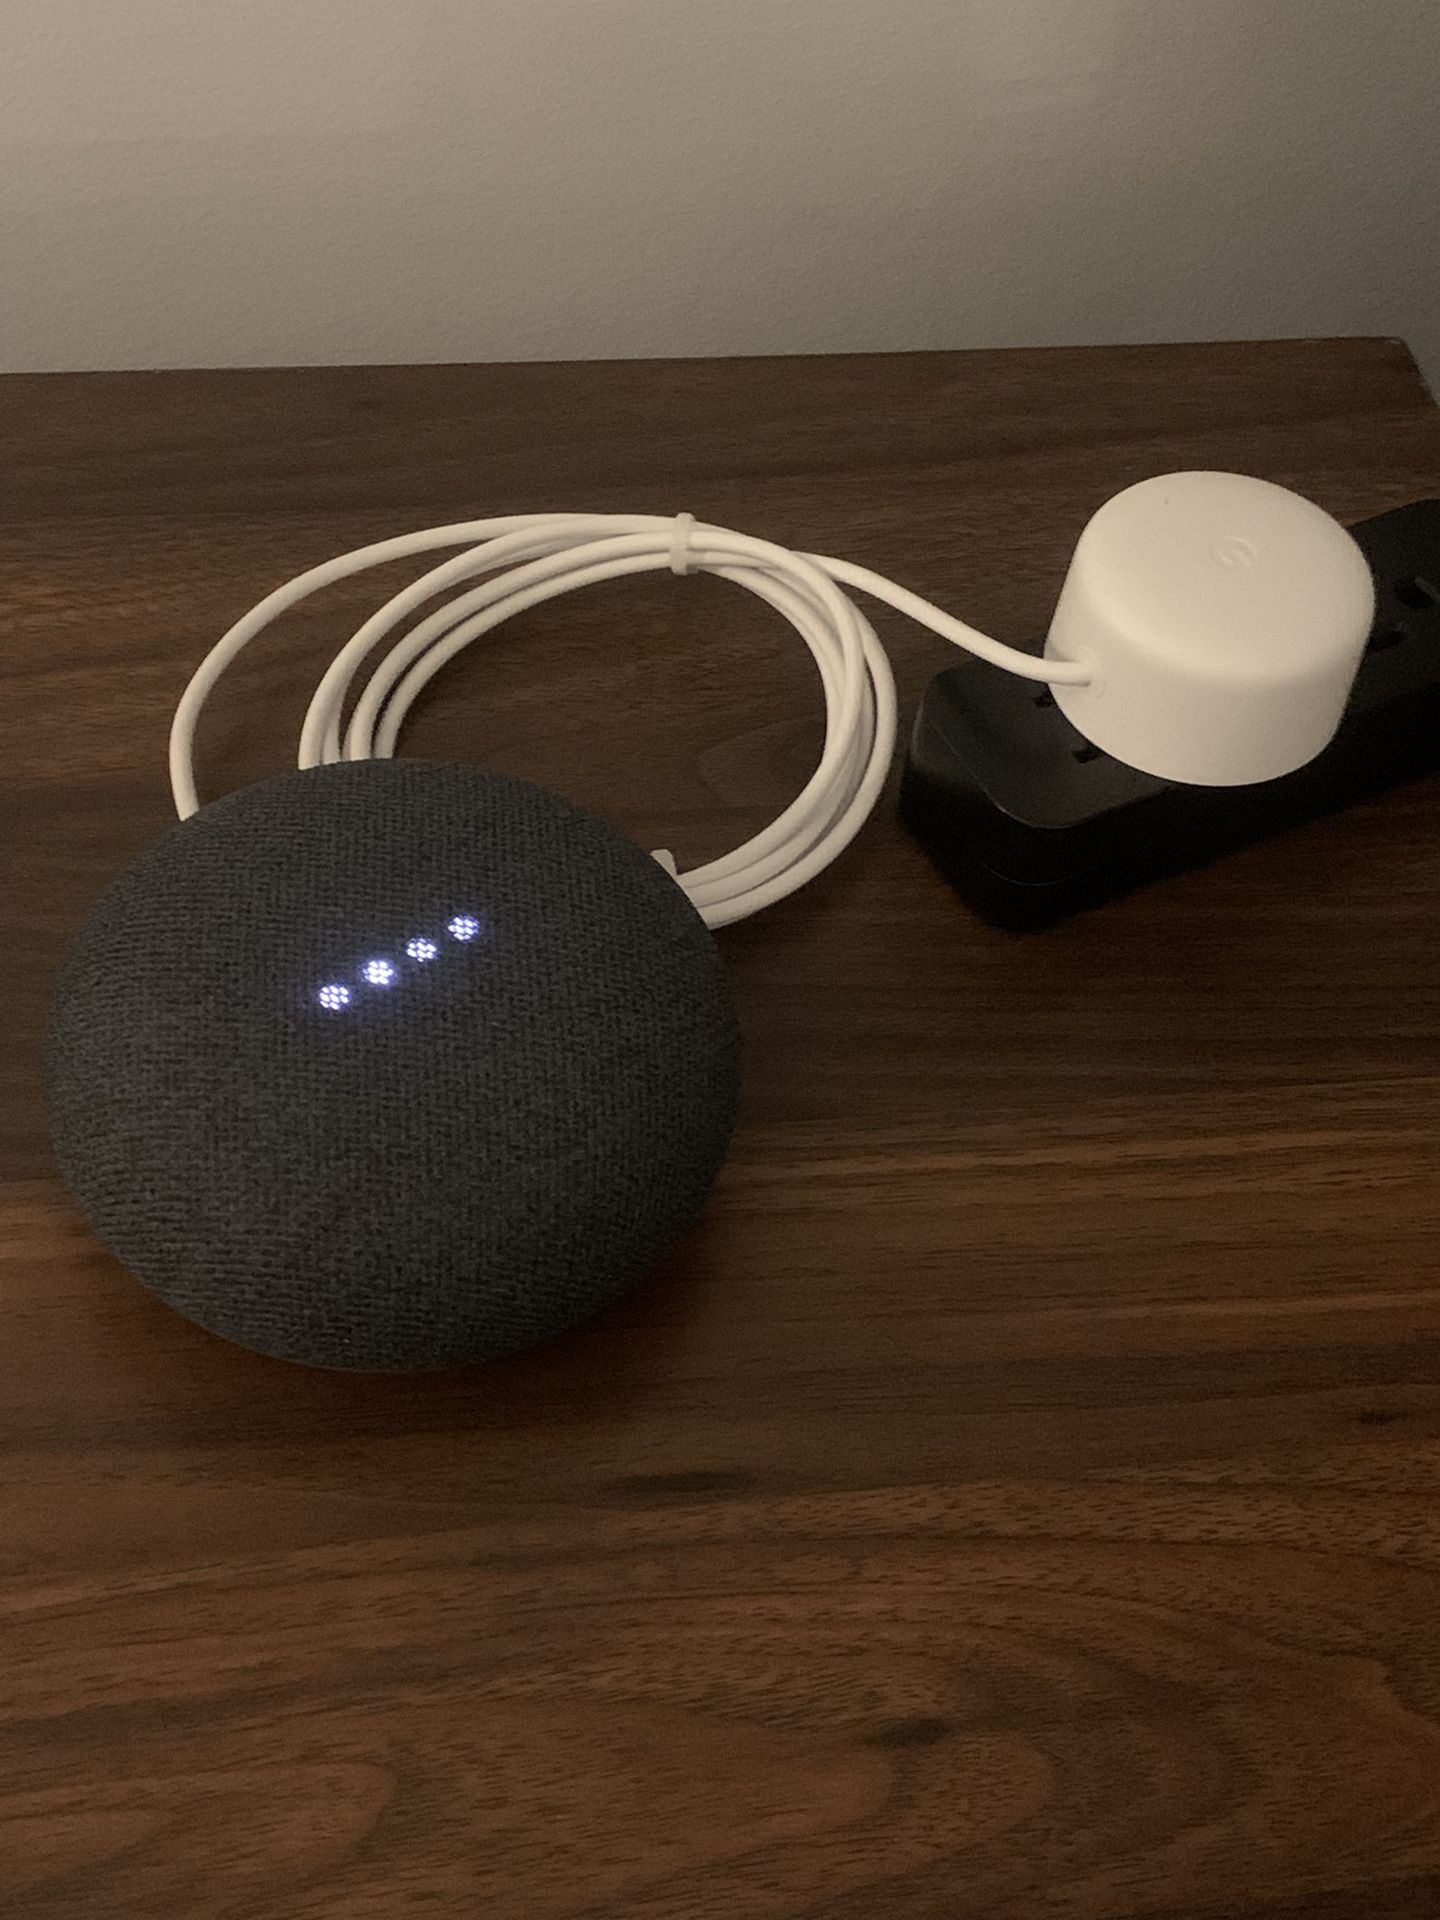 NEW Google Home Mini (1st Generation) - Smart Speaker with Google Assistant - Charcoal Gray